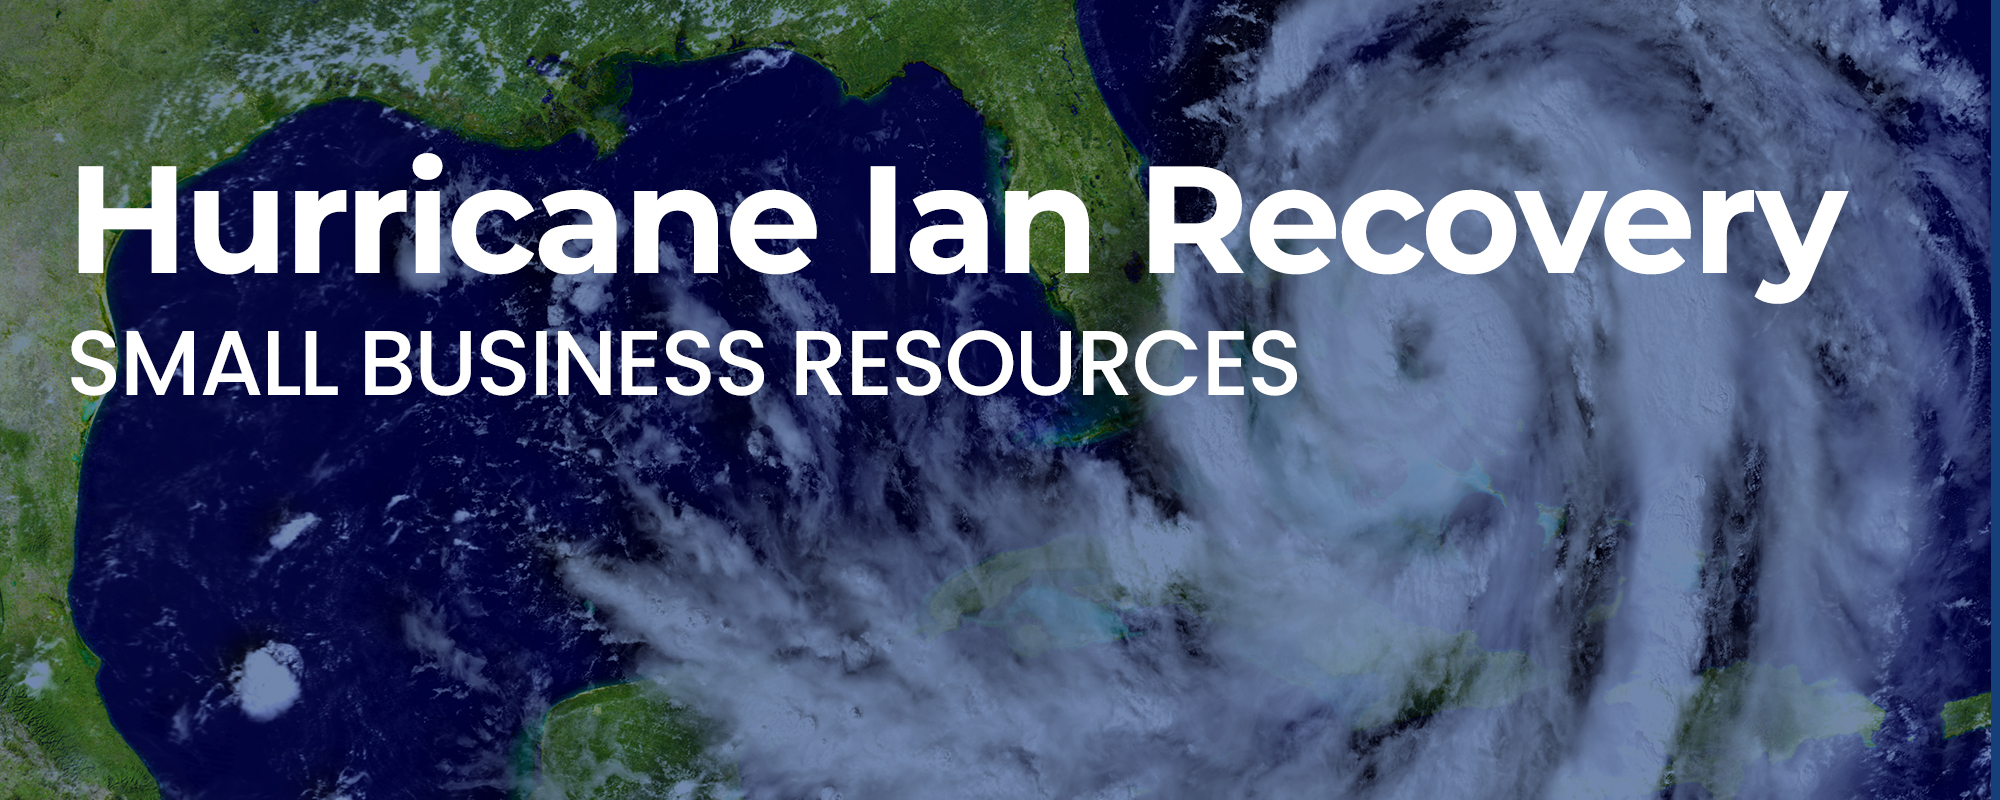 Hurricane Ian Recovery Small Business Resources 